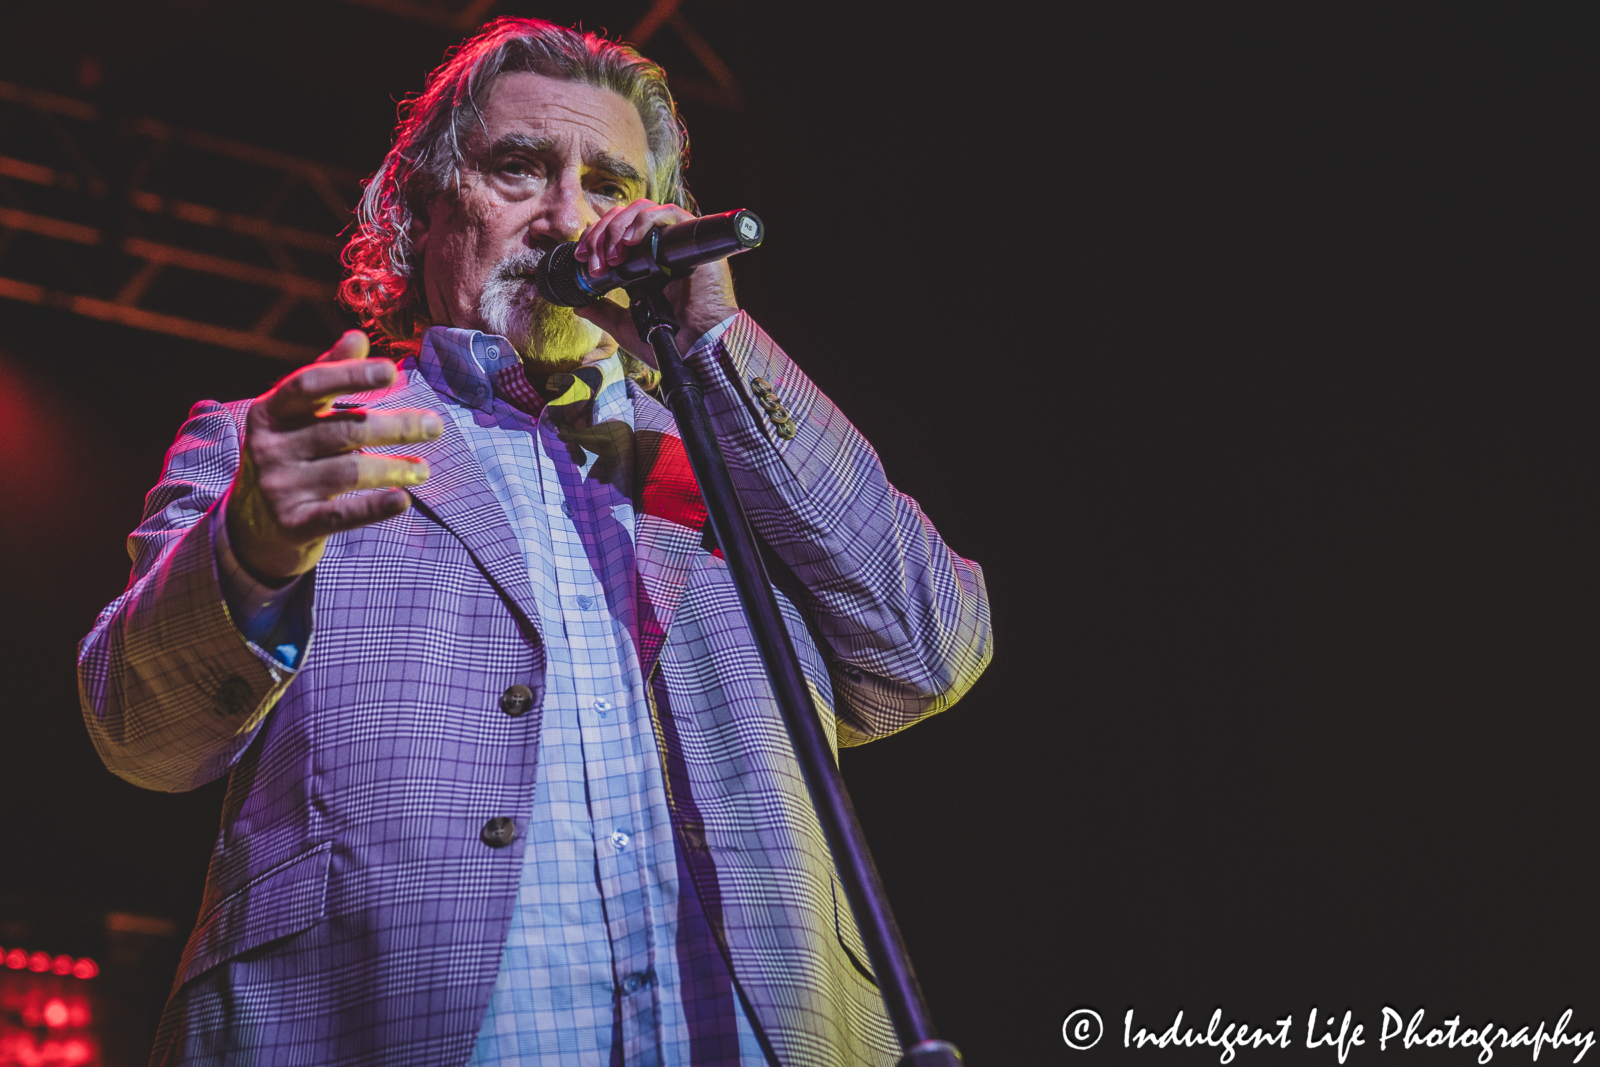 Bass singer Richard Sterban of country and gospel music group The Oak Ridge Boys live in concert at Ameristar Casino in Kansas City, MO on October 6, 2023.